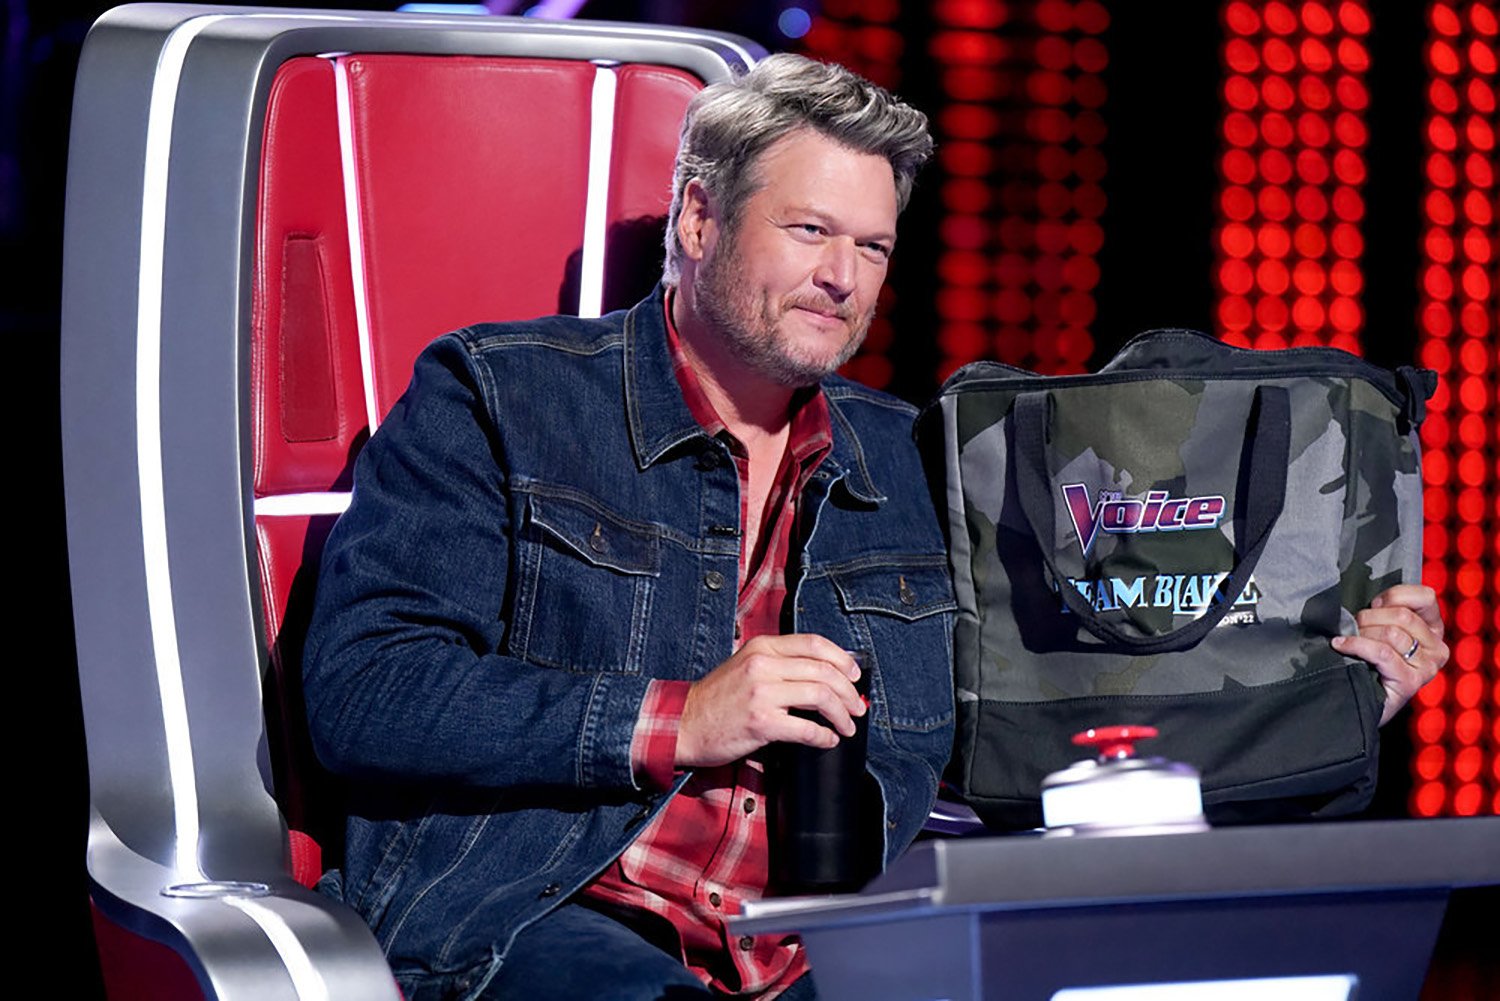 Blake Shelton appears on 'The Voice' Season 22 as he announces he's quitting after season 23